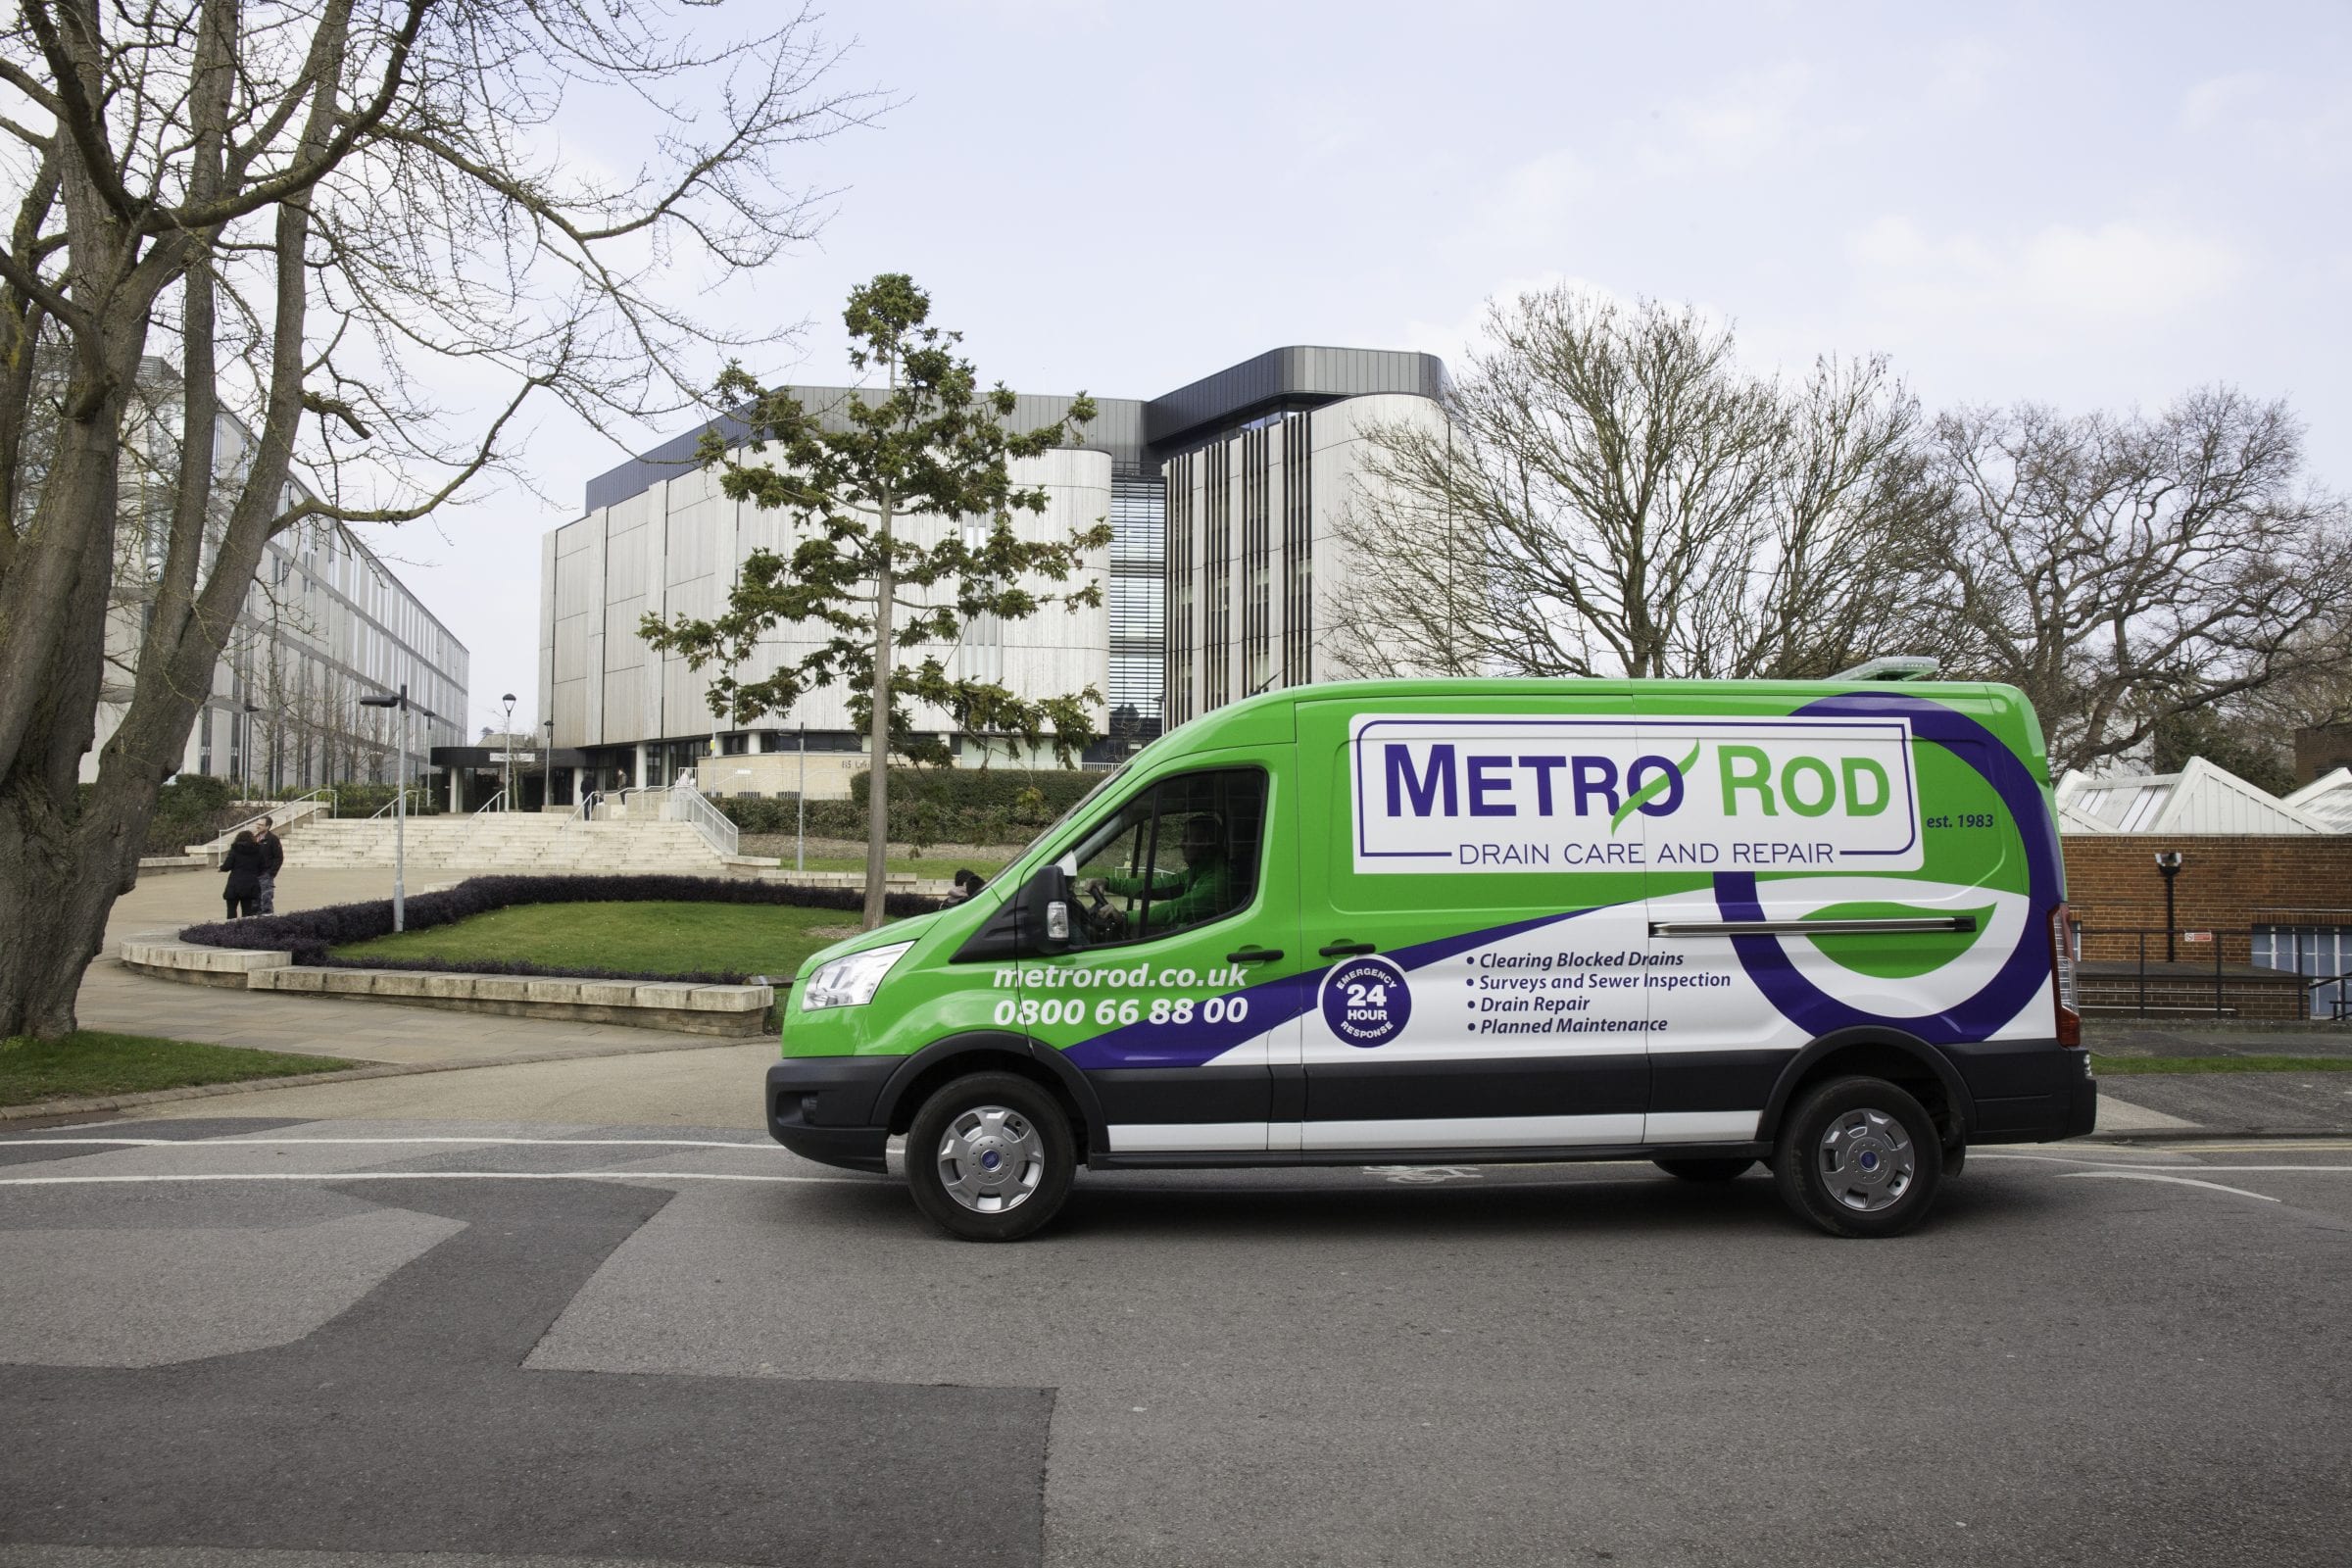 Unbelievable Generosity From The Metro Rod Network Means A Boost To The Harefield Hospital Charity!